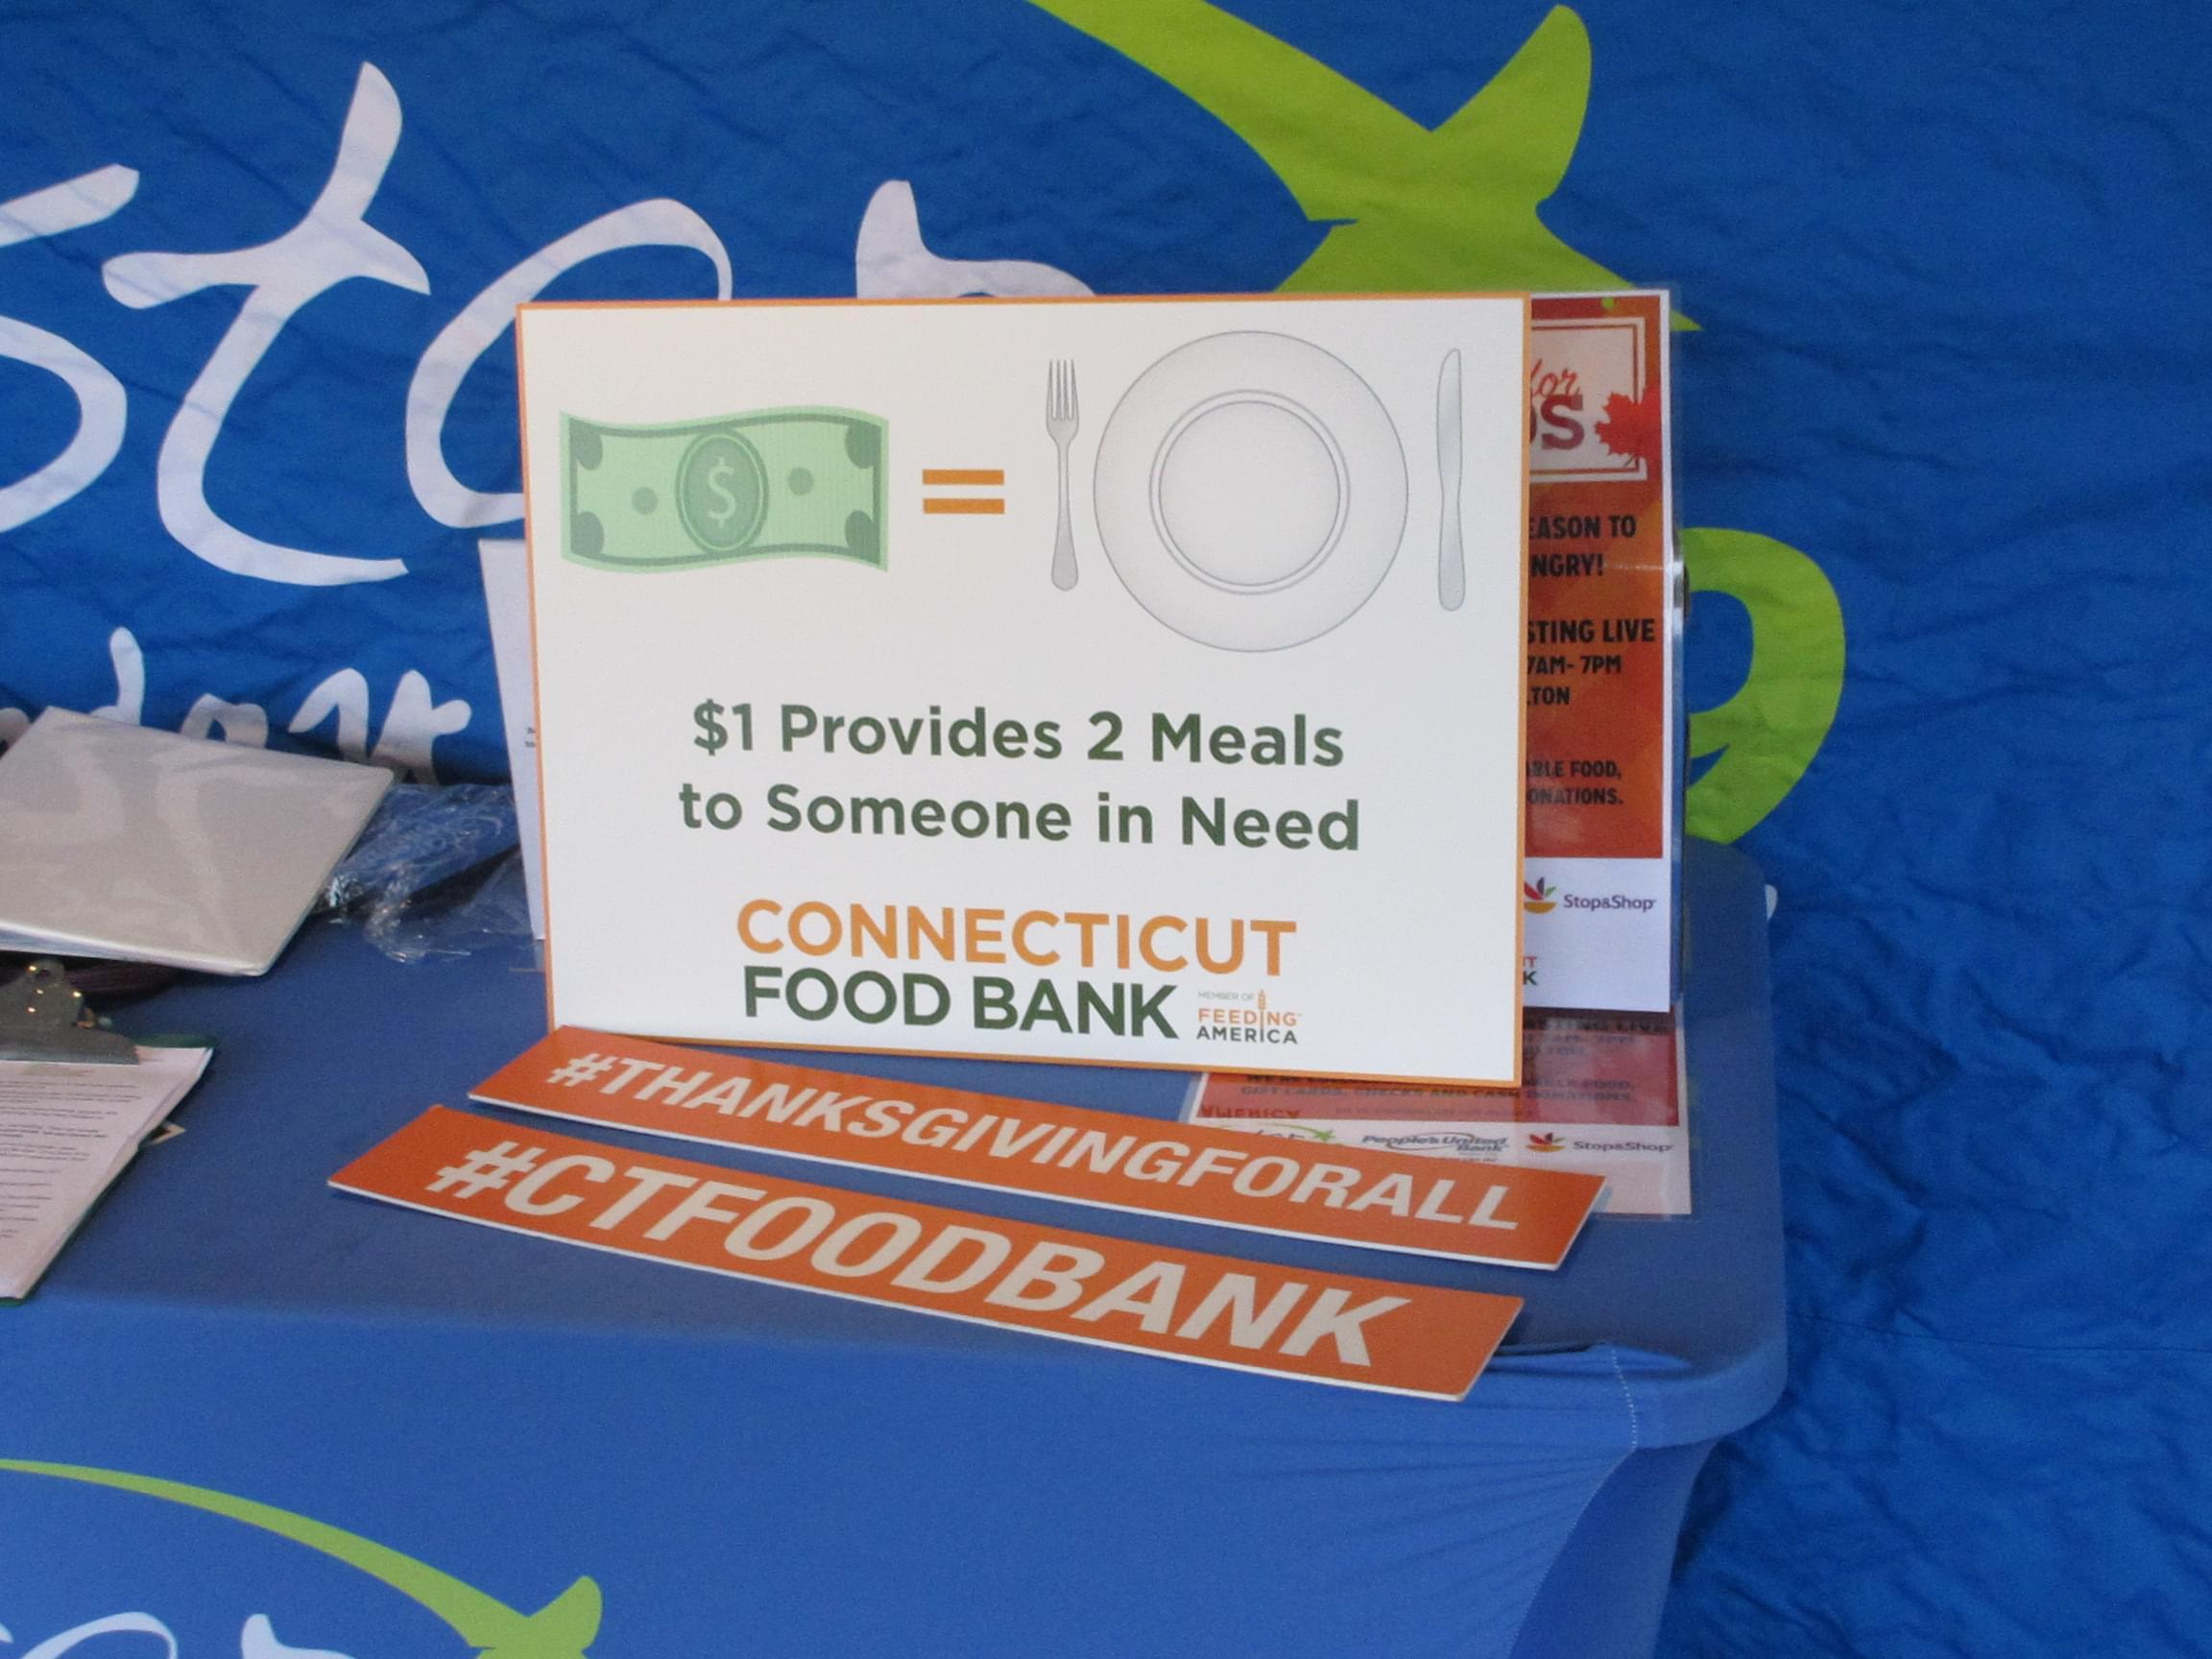 TELL ME SOMETHING GOOD: The CT Food Bank Is Getting Creative With Distributing This Much Needed Item